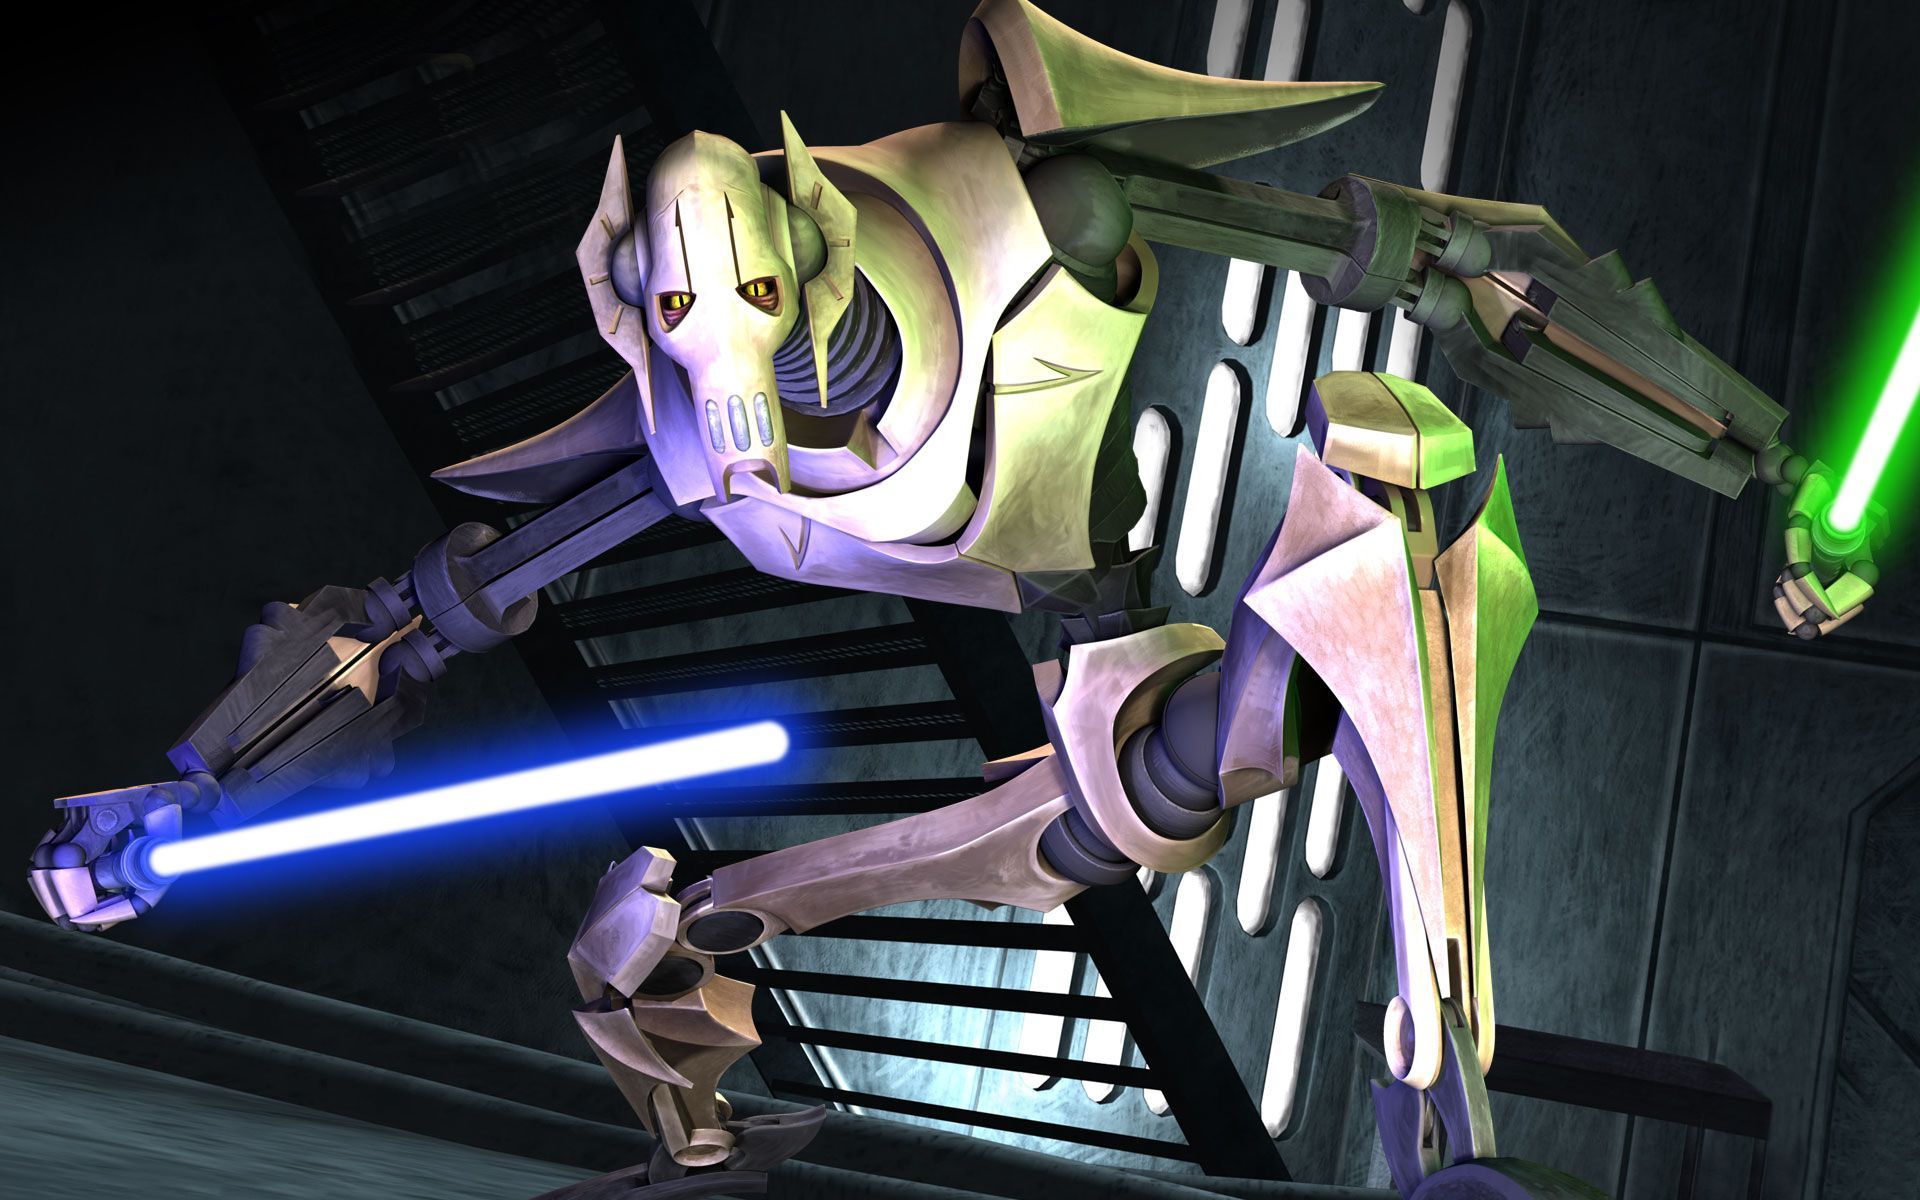 General Grievous (The Clone Wars). Star wars wallpaper, Star wars clone wars, Clone wars